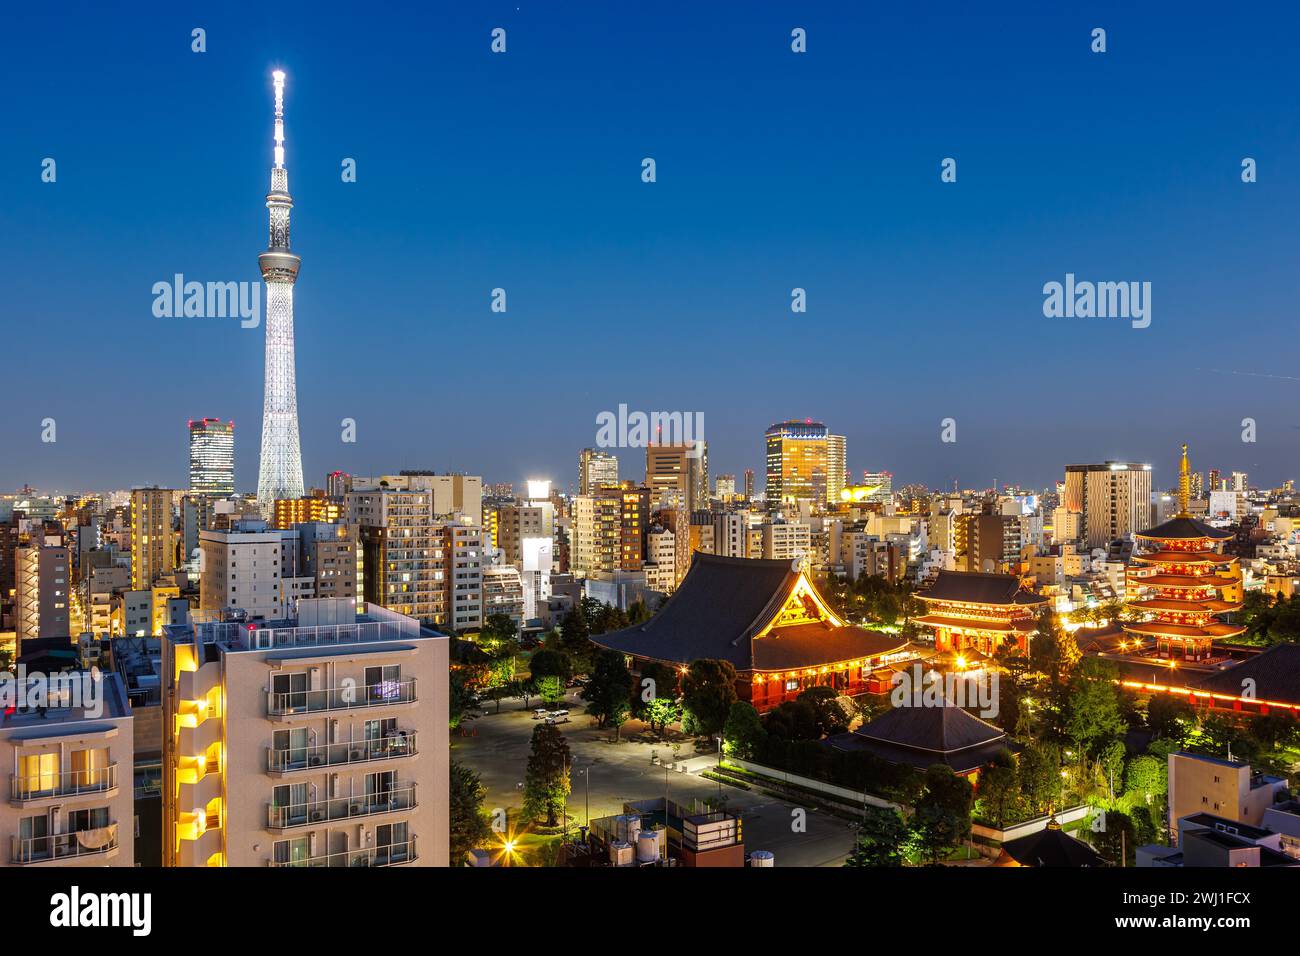 Tokyo SkyTree tower and Asakusa Shrine with the skyline skyscrapers at night in Tokyo, Japan Stock Photo